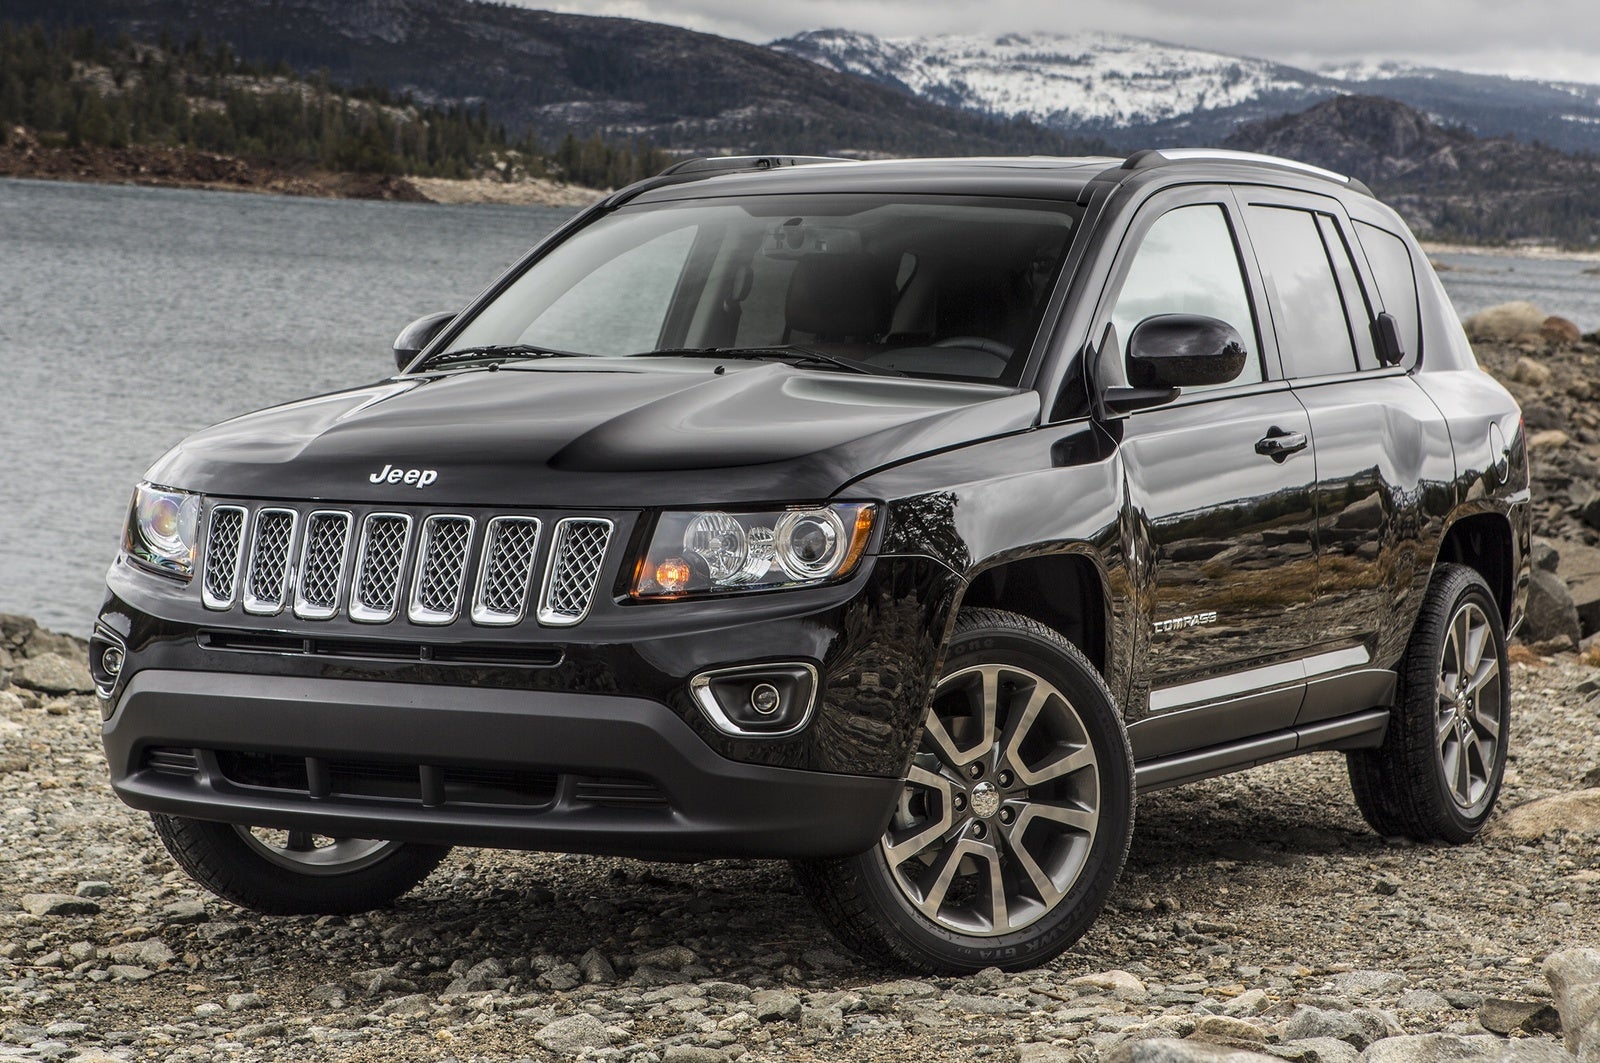 Jeep compass price list south africa #3